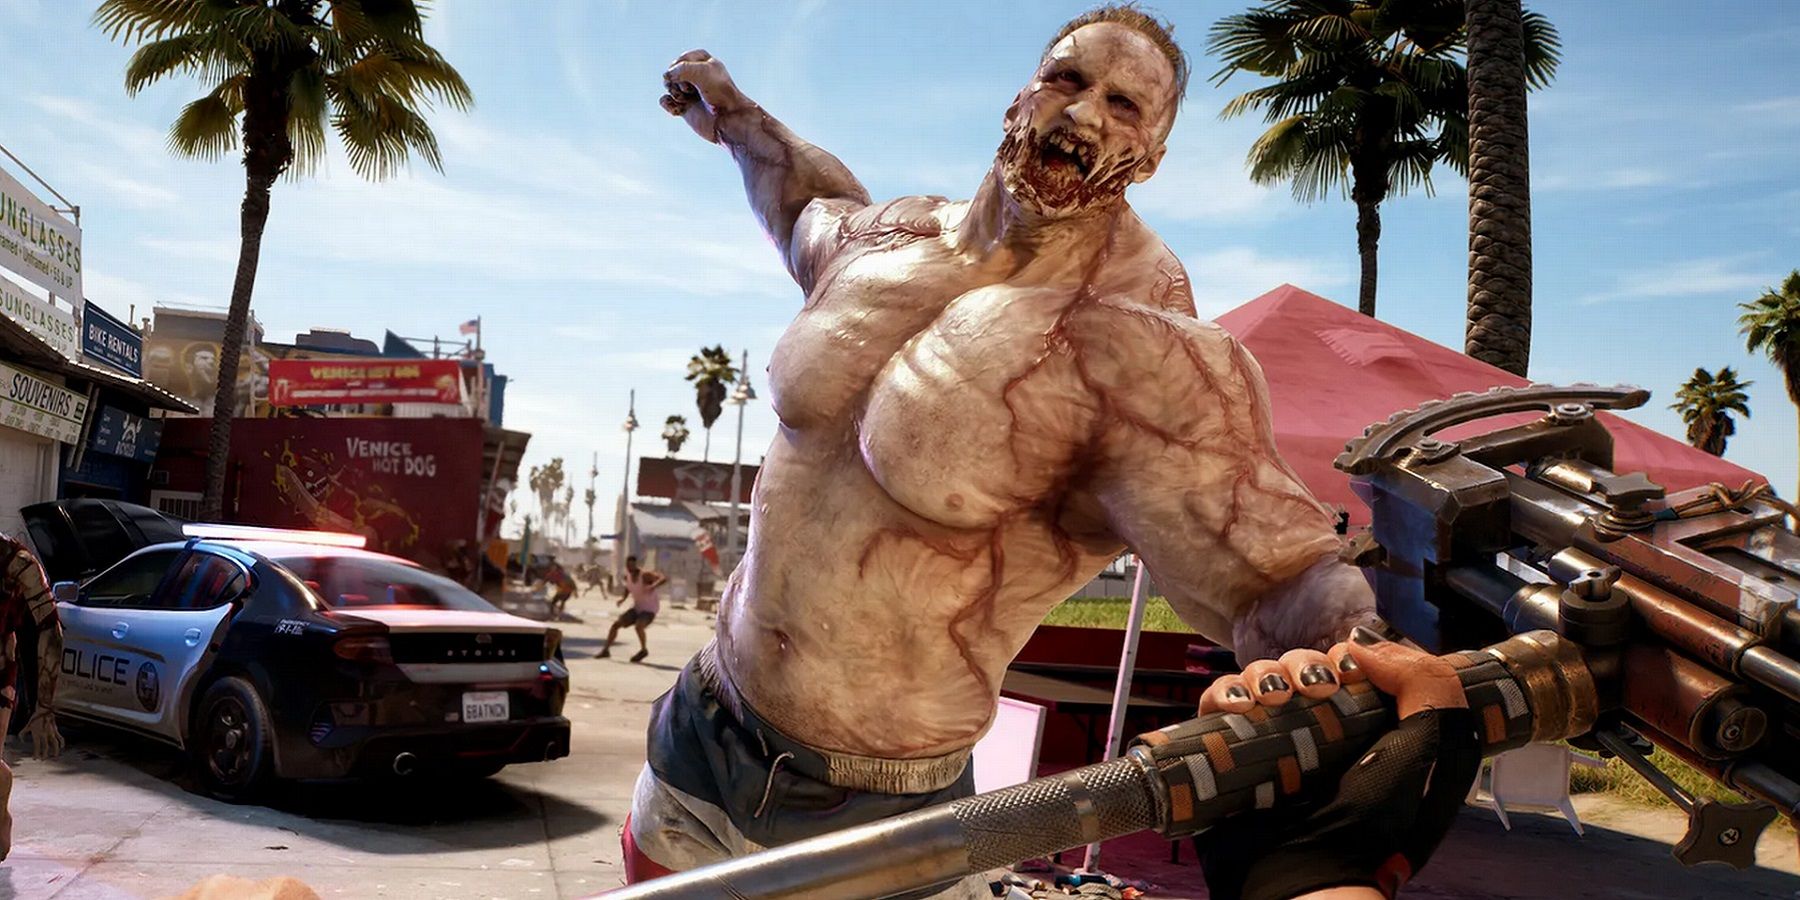 Image from Dead Island 2 showing a muscular zombie leaping towards the player.